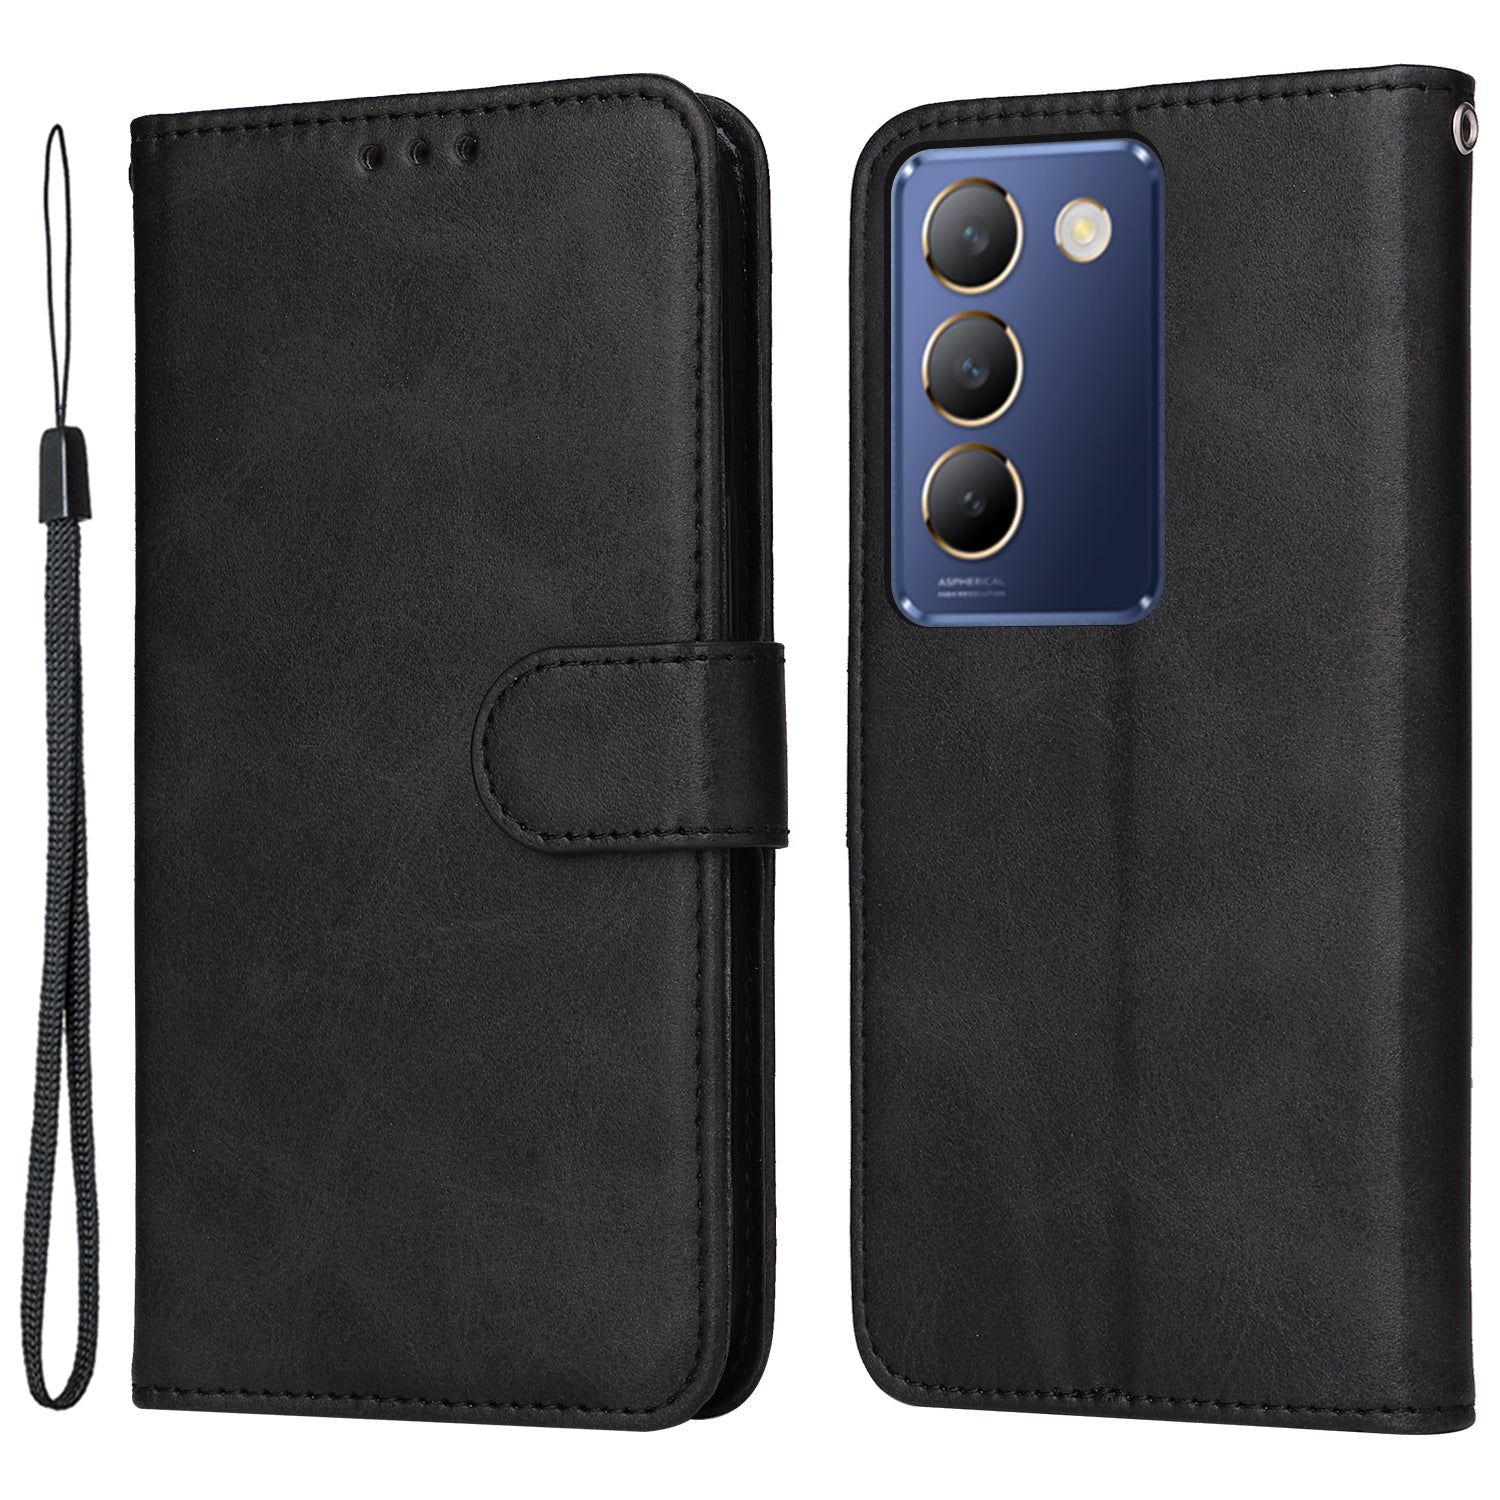 For vivo Y100 5G (Indonesia) / Y200e 5G / T3 5G (India) / V30 Lite 5G (India) Magnetic Case Leather Viewing Stand Phone Cover - Black